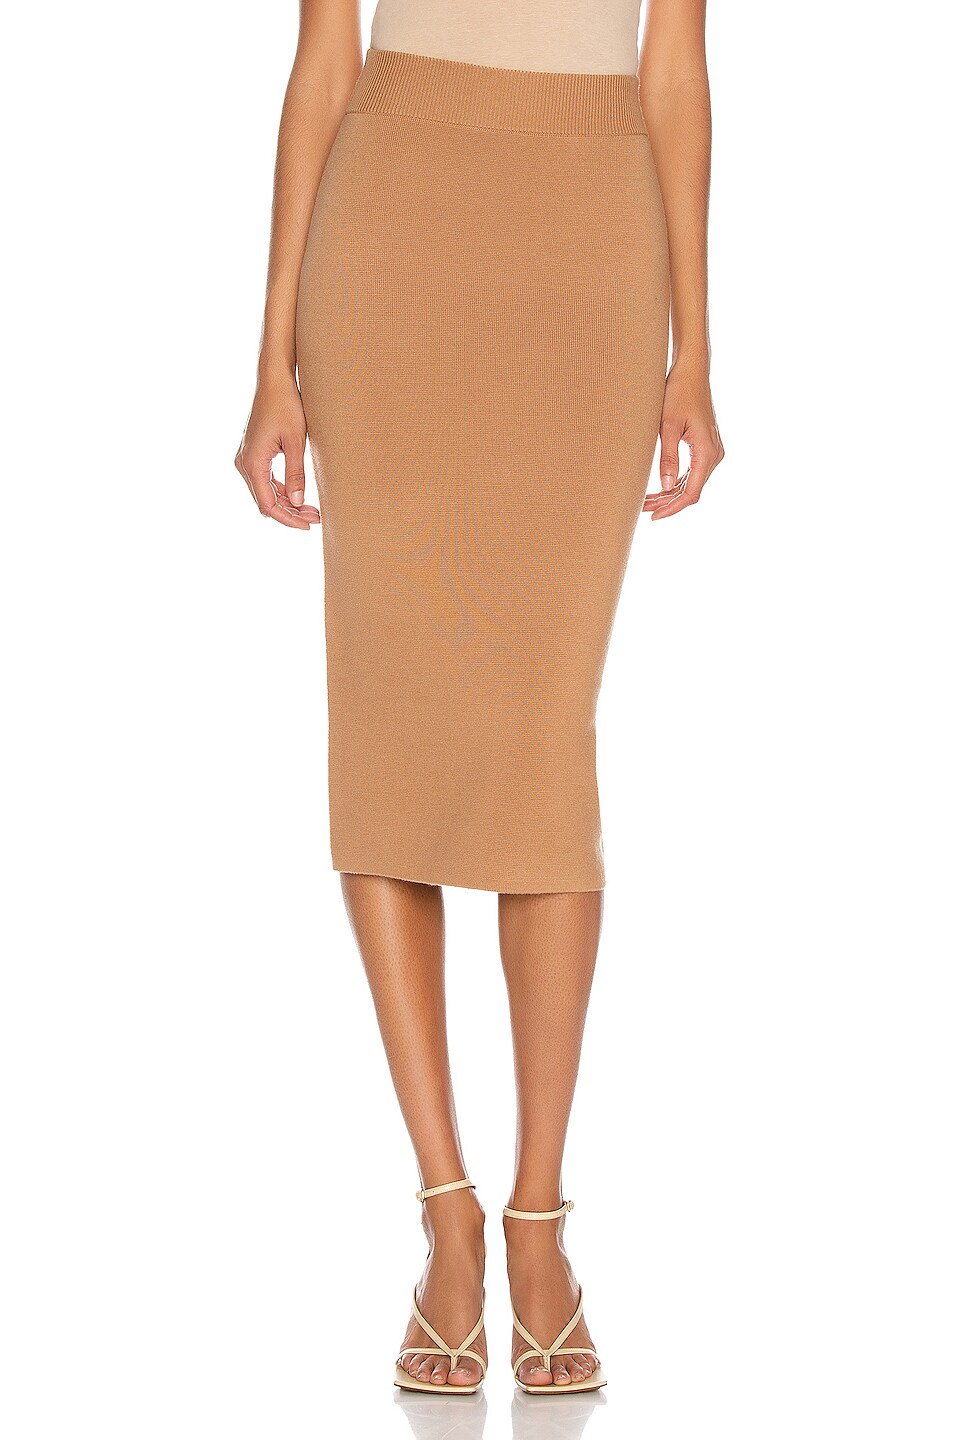 Image 1 of Victor Glemaud Colorblock Skirt in Solid Camel